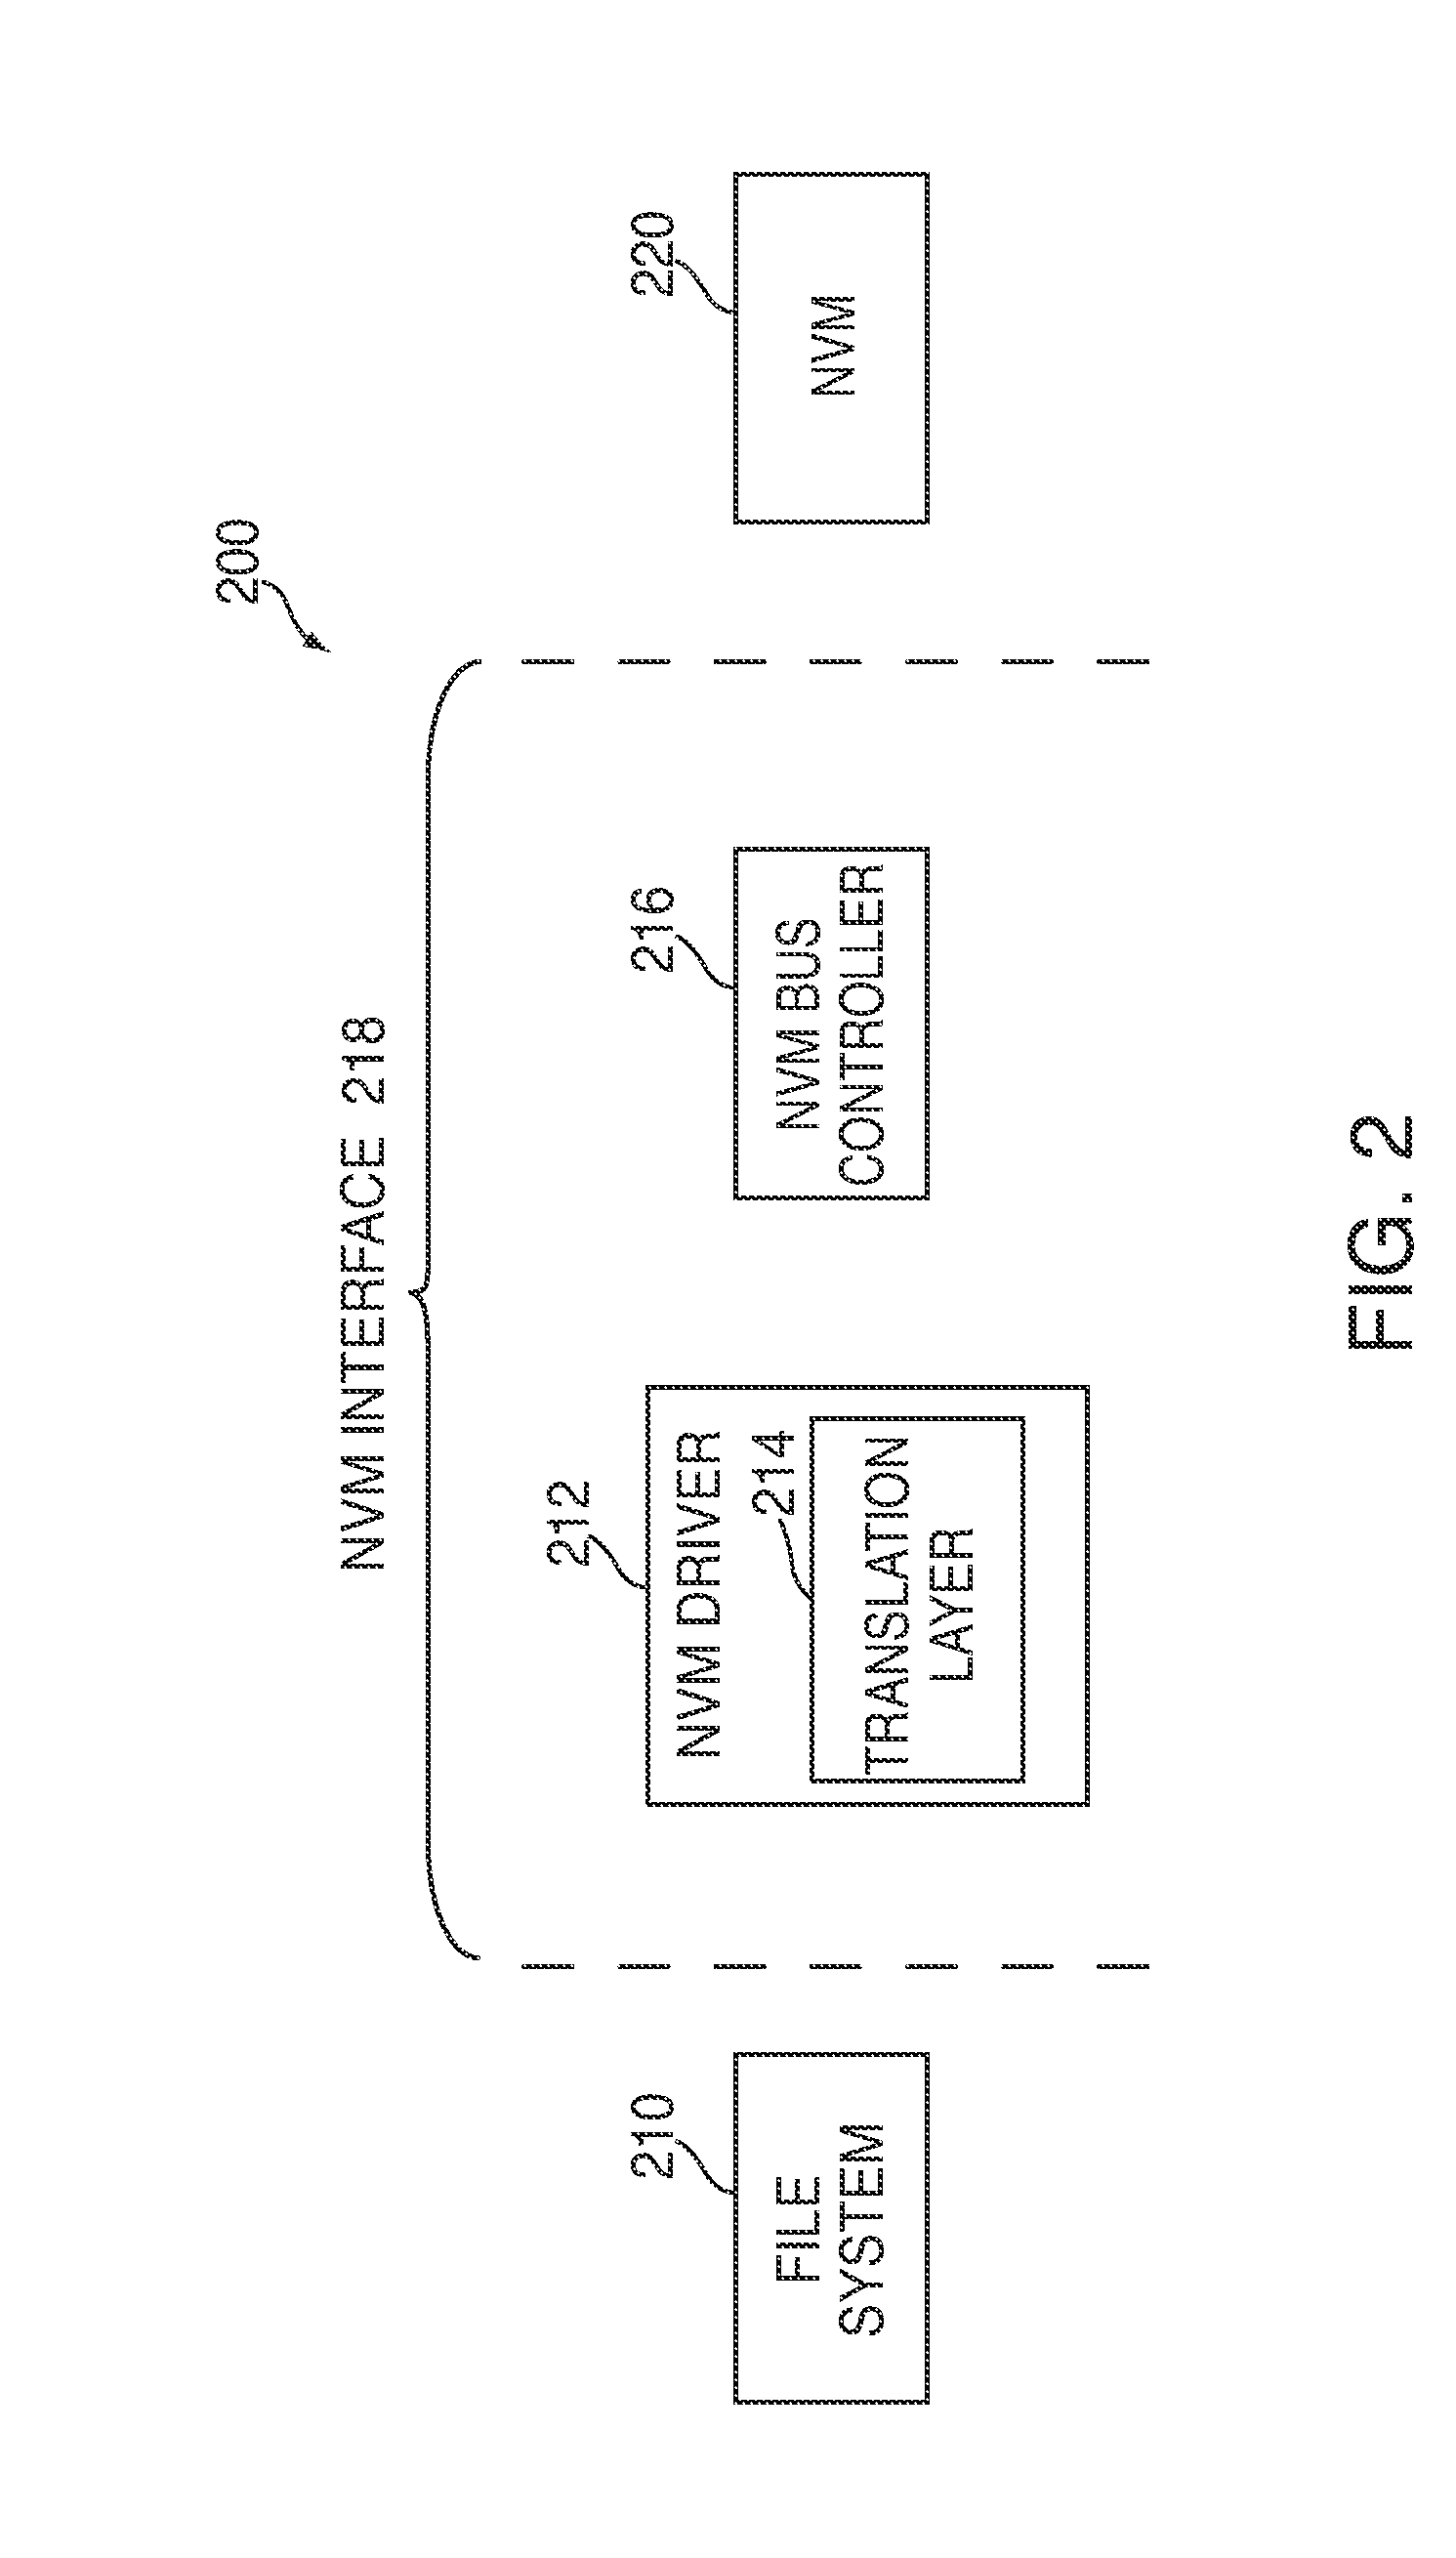 Efficient buffering for a system having non-volatile memory